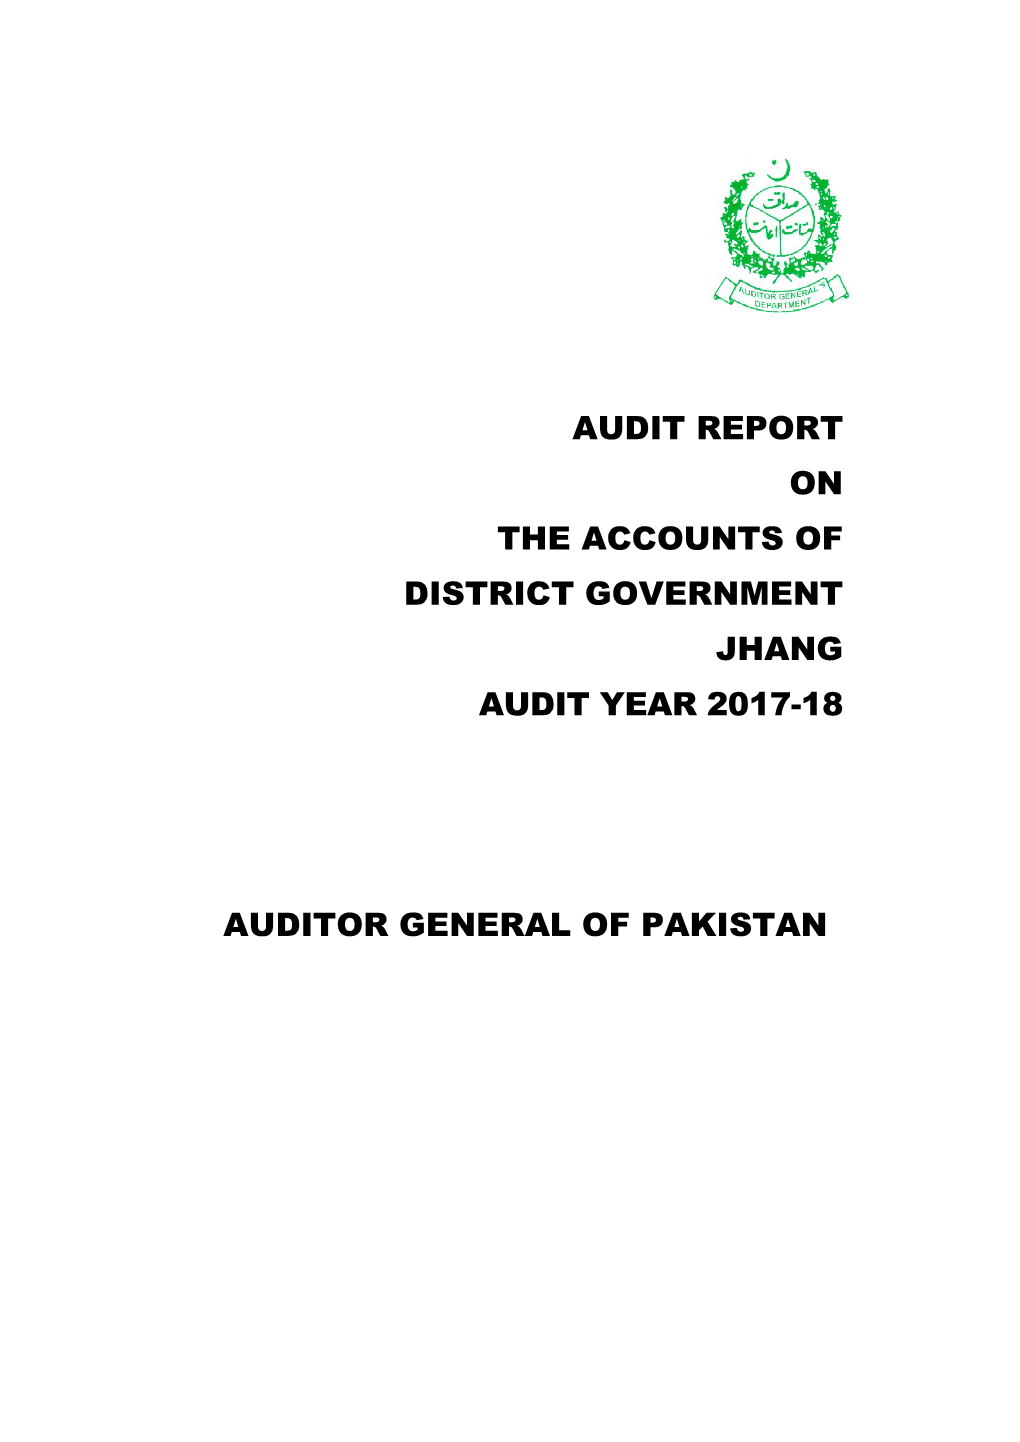 Audit Report on the Accounts of District Government Jhang Audit Year 2017-18 Auditor General of Pakistan